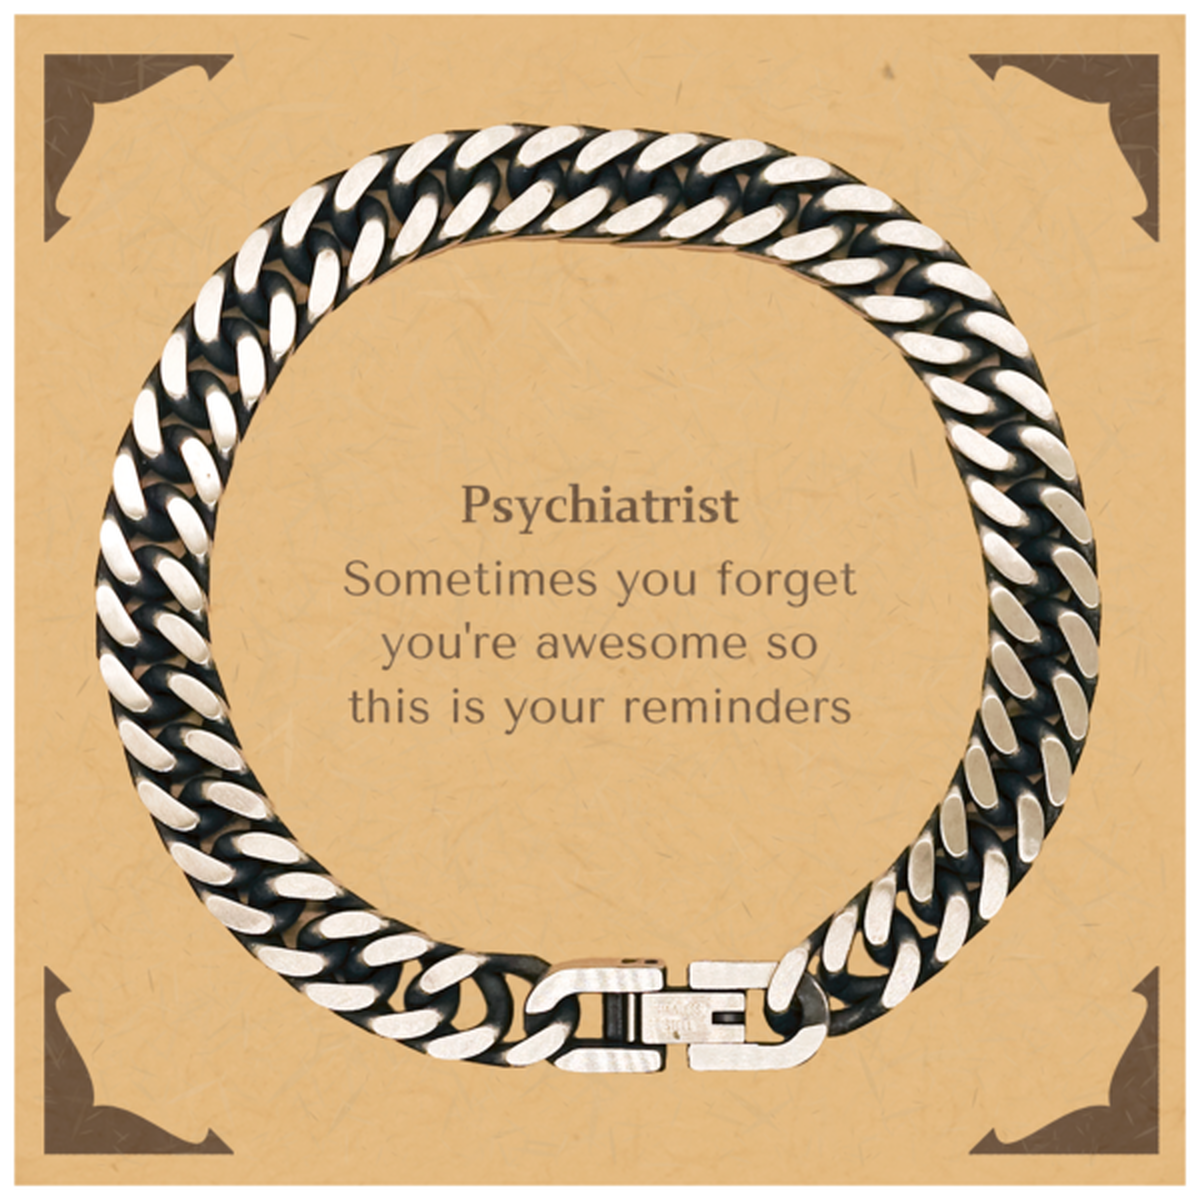 Sentimental Psychiatrist Cuban Link Chain Bracelet, Psychiatrist Sometimes you forget you're awesome so this is your reminders, Graduation Christmas Birthday Gifts for Psychiatrist, Men, Women, Coworkers